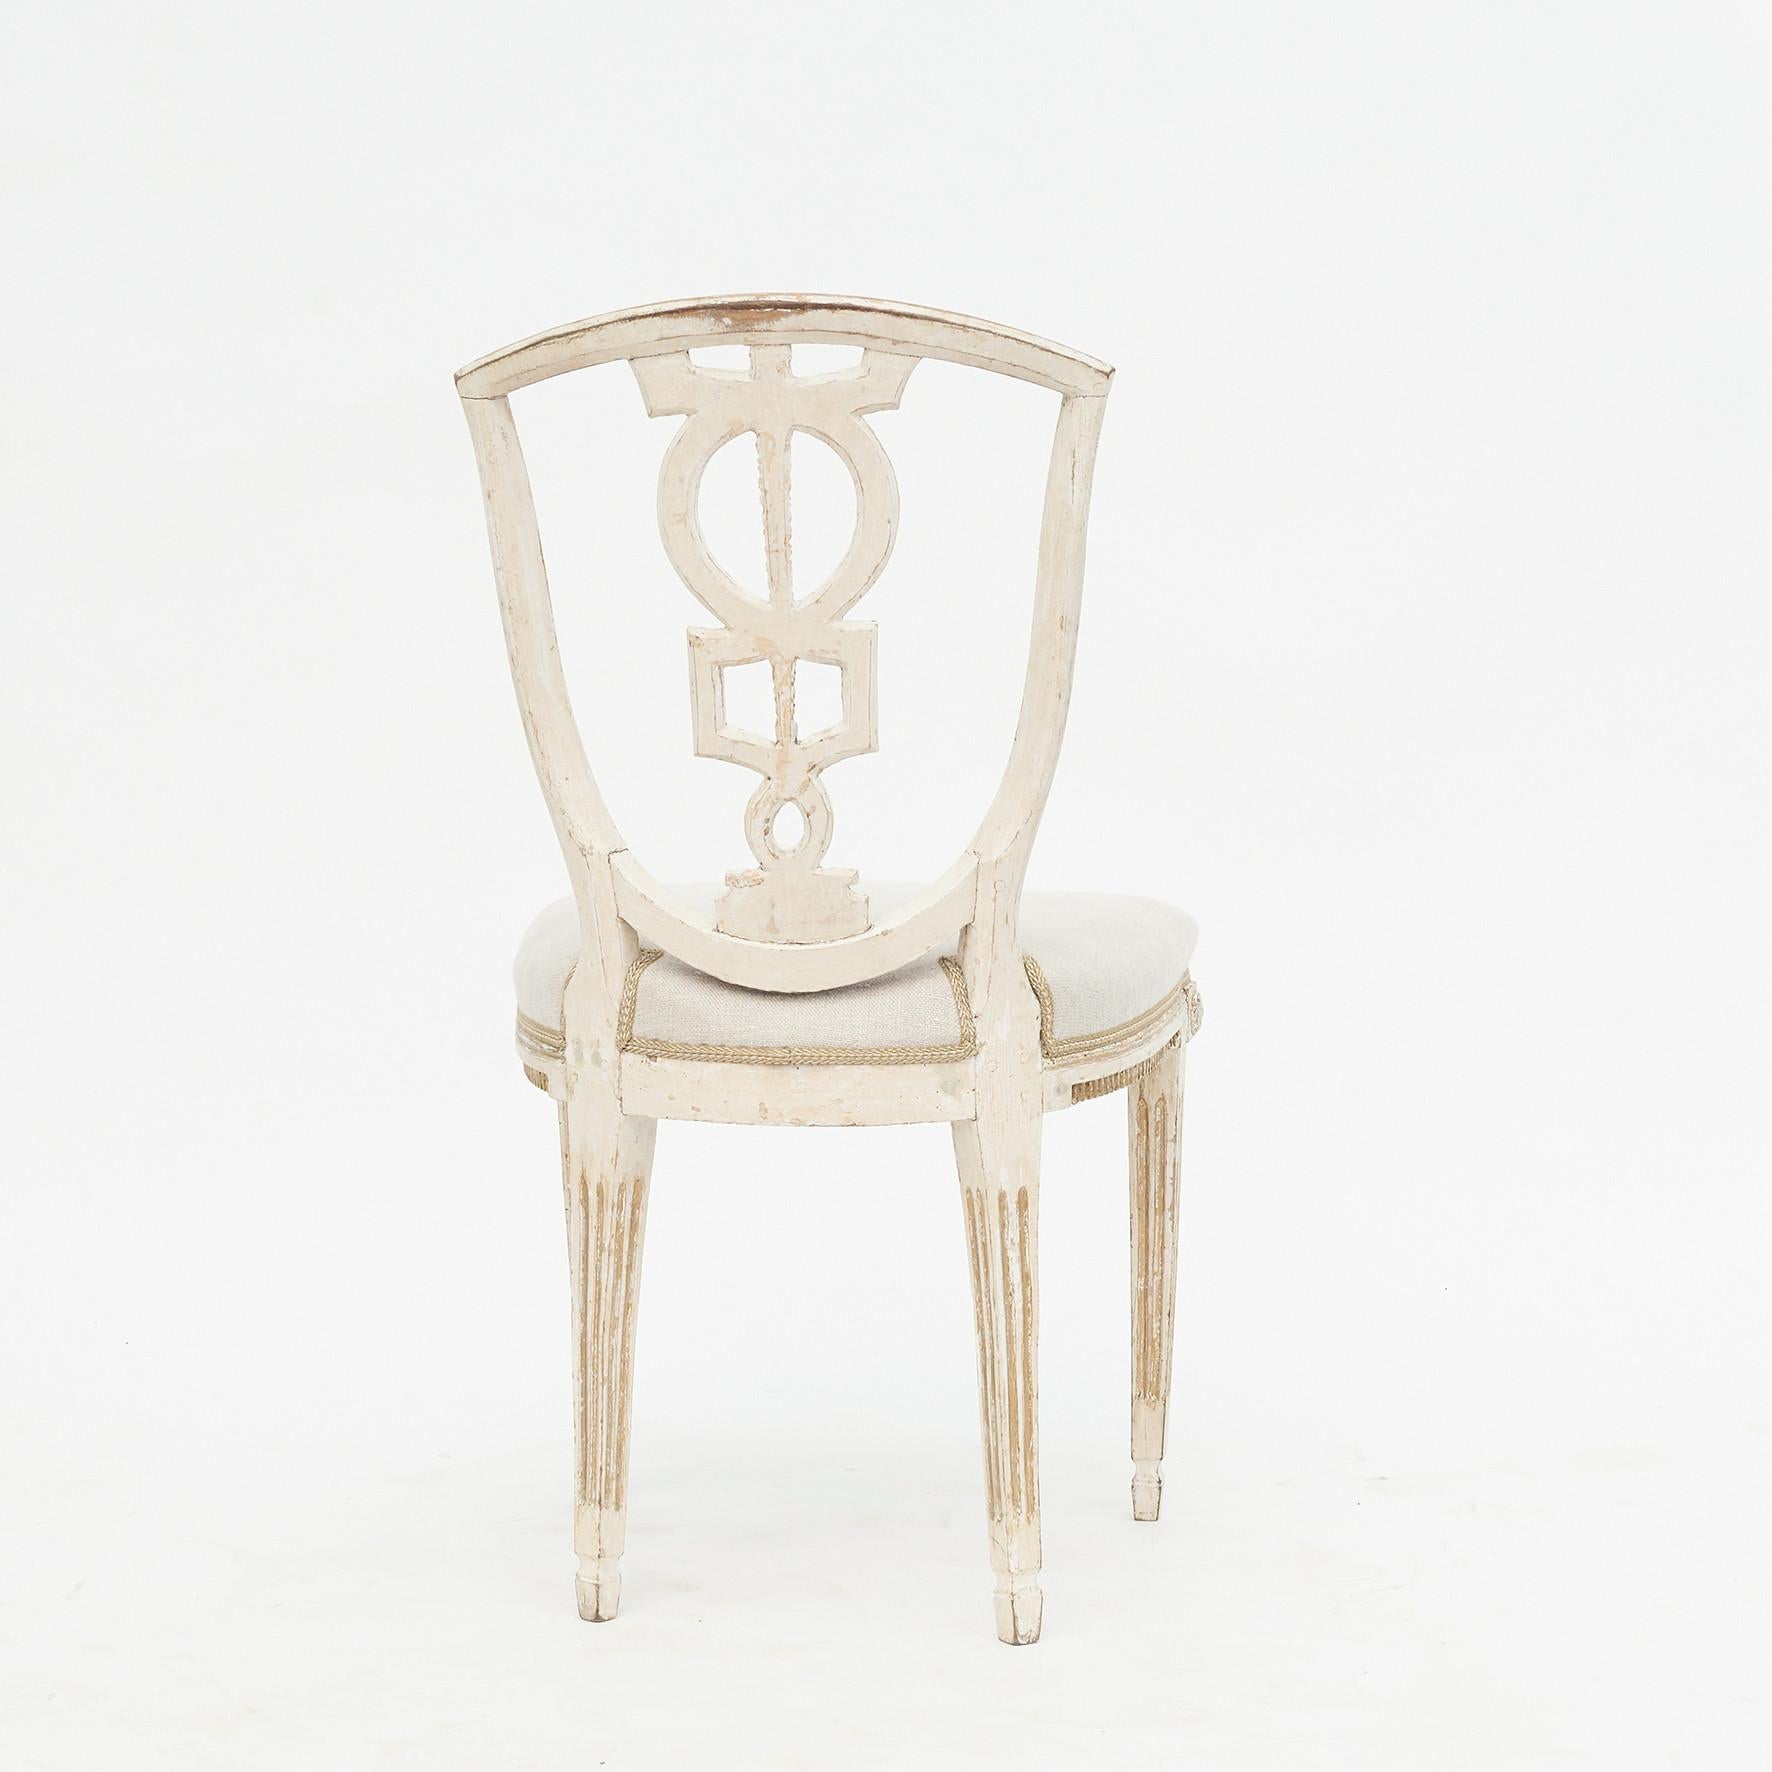 Pair of elegant Louis XVI chairs, 1780-1800. Original white, douce gold.
Chair back with geometric cut-outs and tapered legs with carvings.
Seats reupholstered with linen.
Good natural patina.
Sold as a pair.